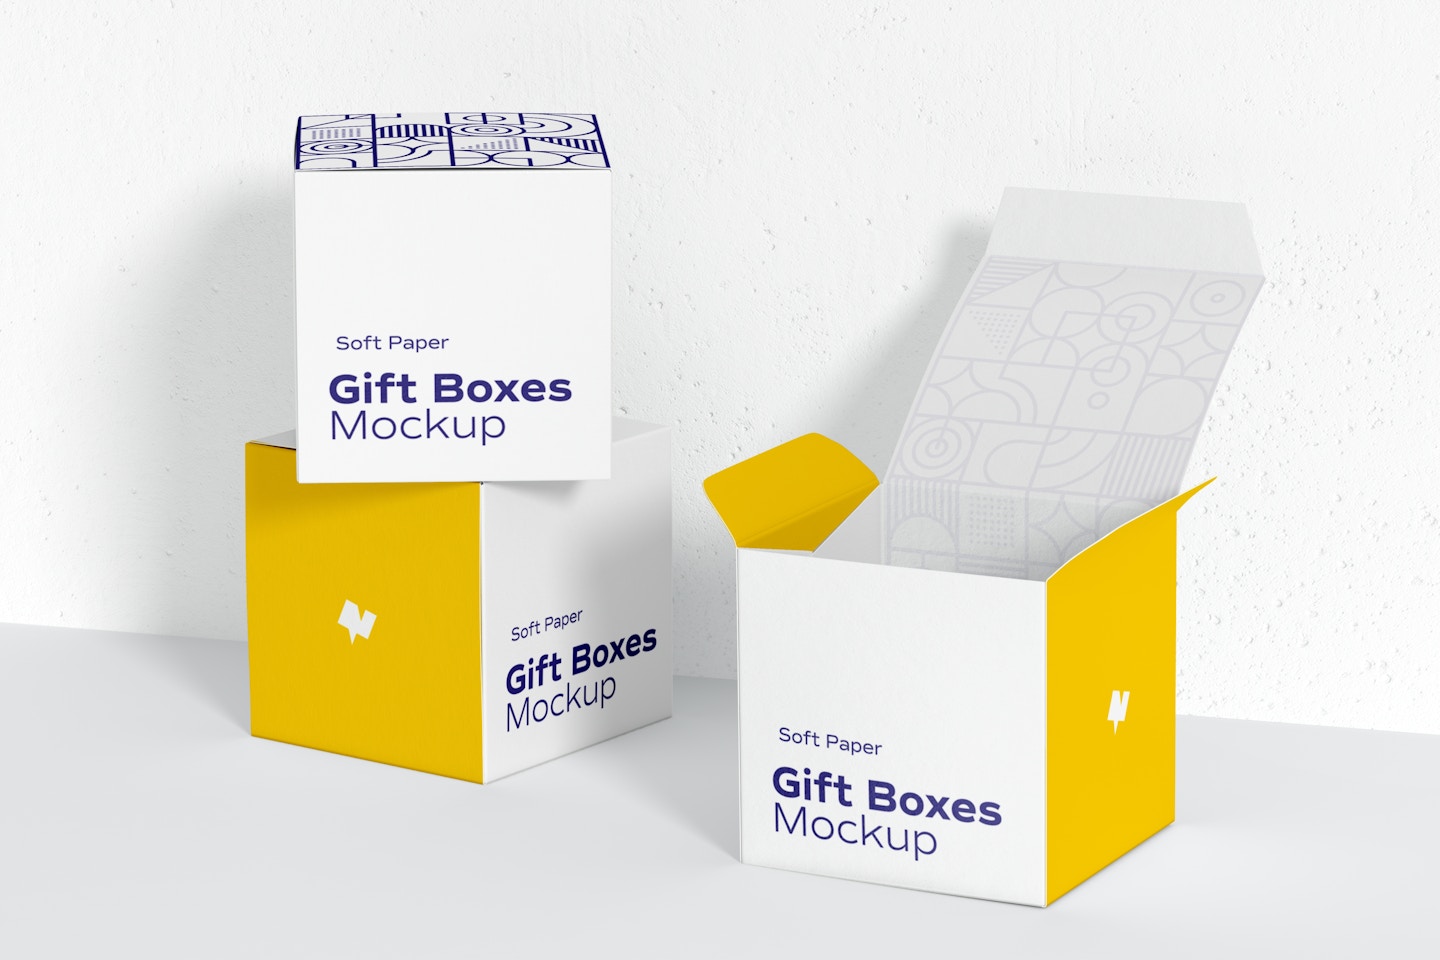 Soft Paper Gift Boxes Mockup, Right View